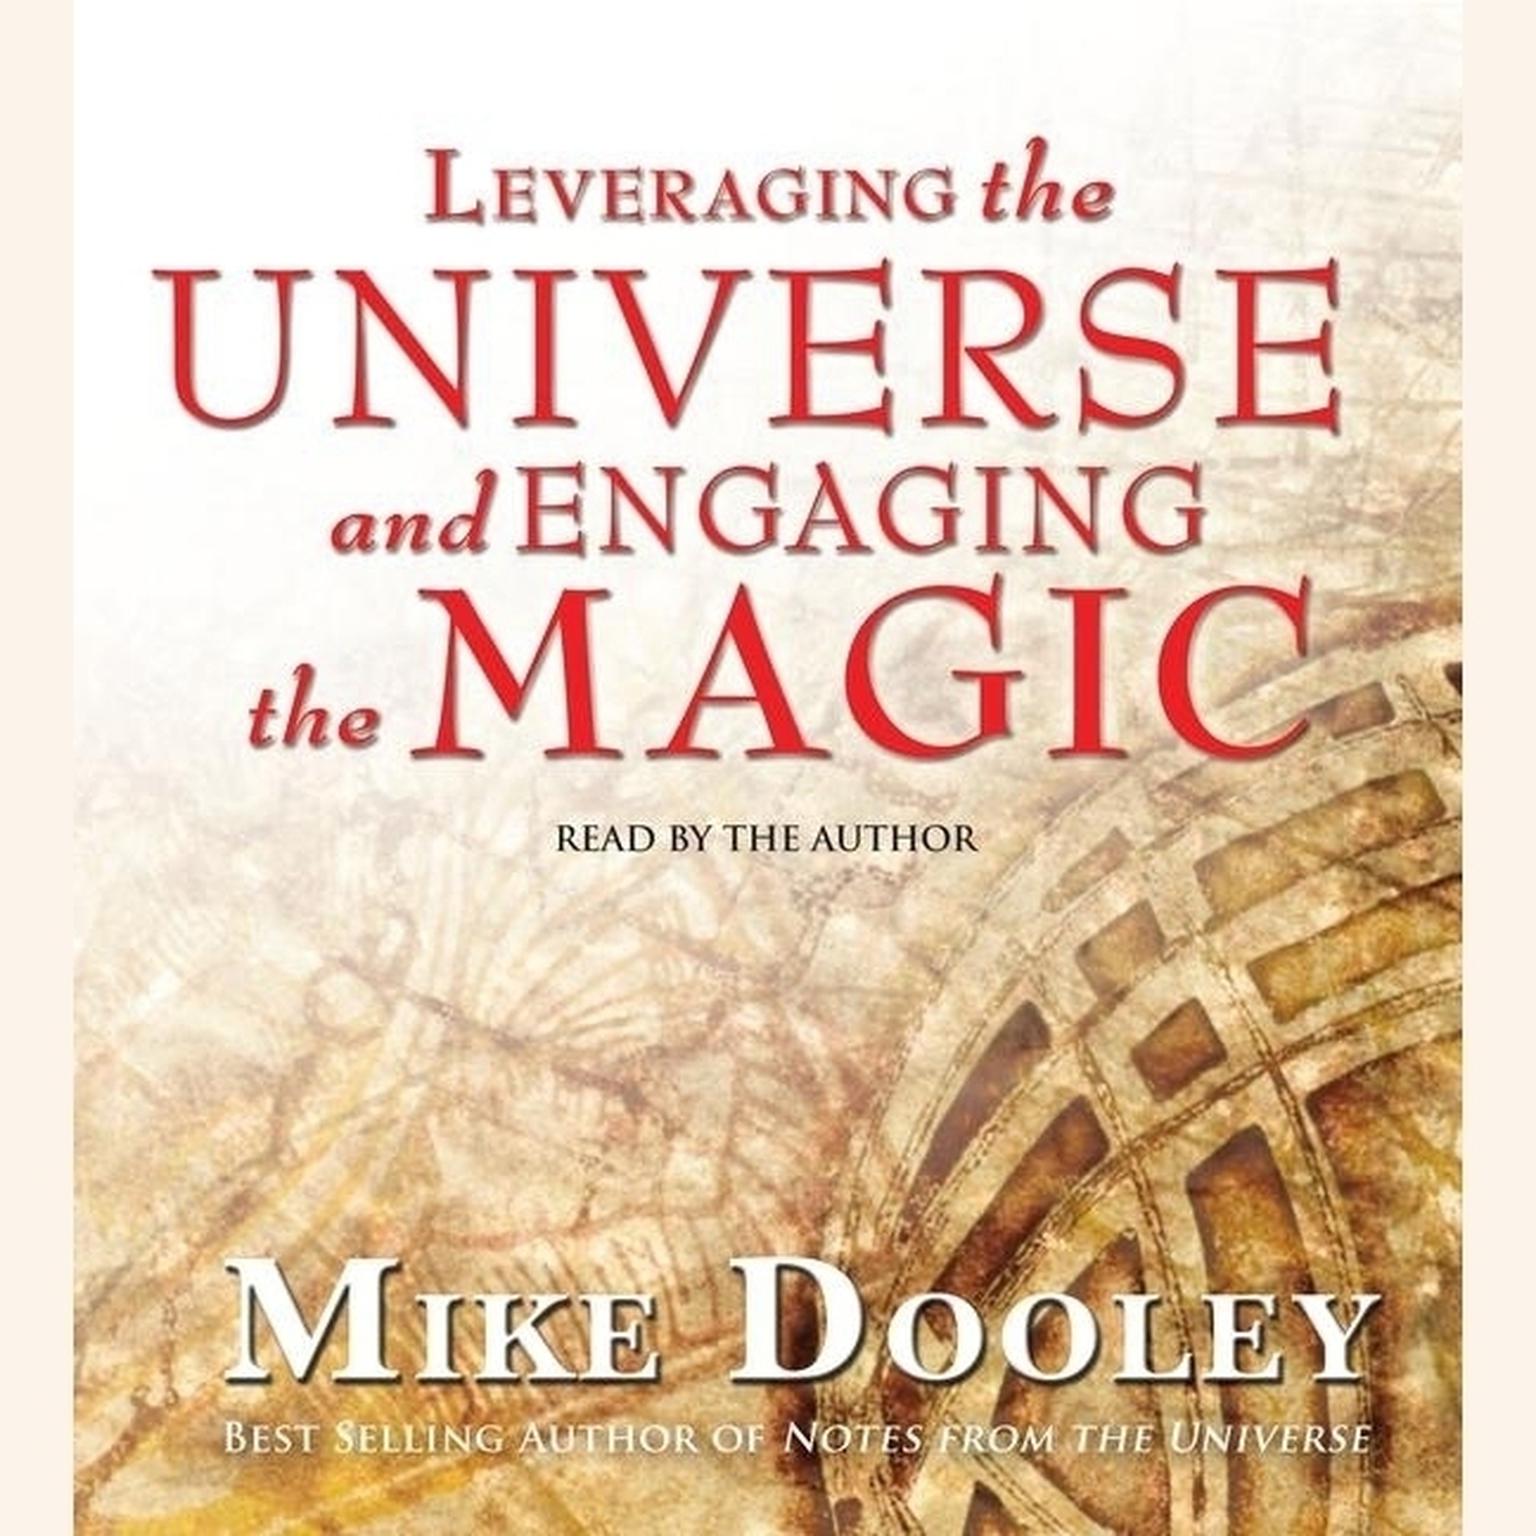 Leveraging the Universe and Engaging the Magic (Abridged) Audiobook, by Mike Dooley